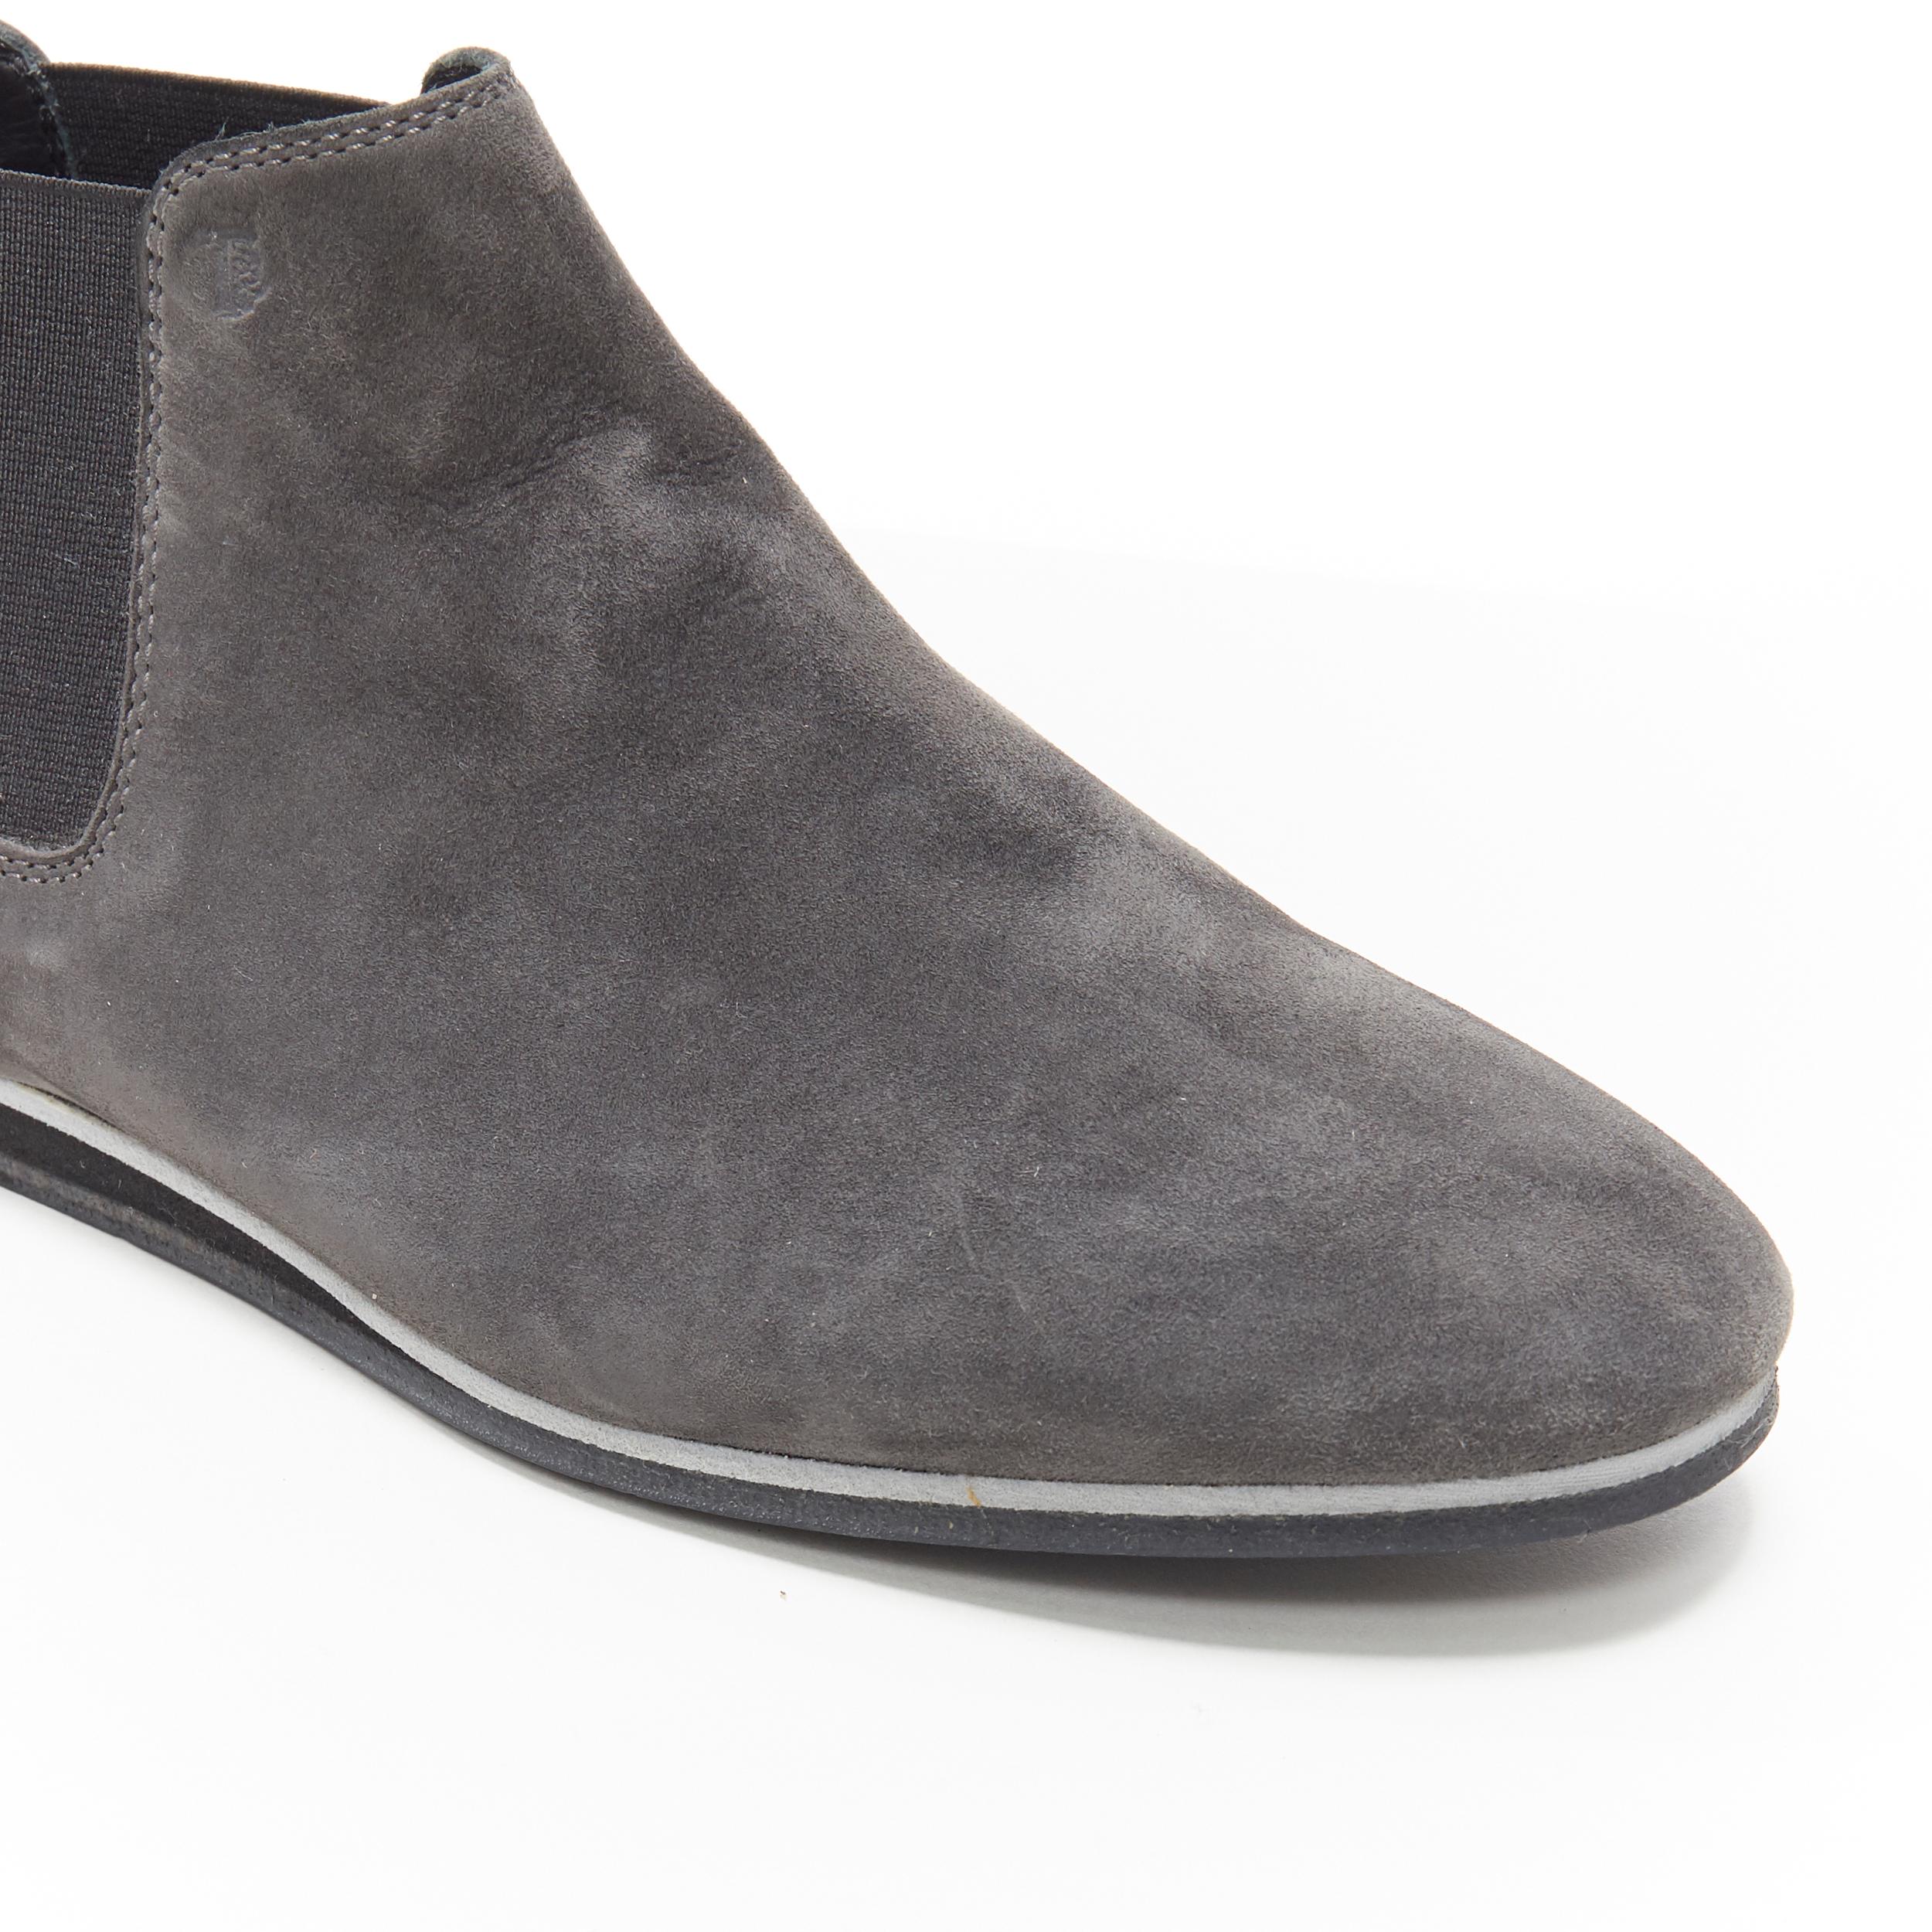 Women's TOD'S No Code dark grey suede elastic gusset round toe flat ankle bootie EU37 For Sale